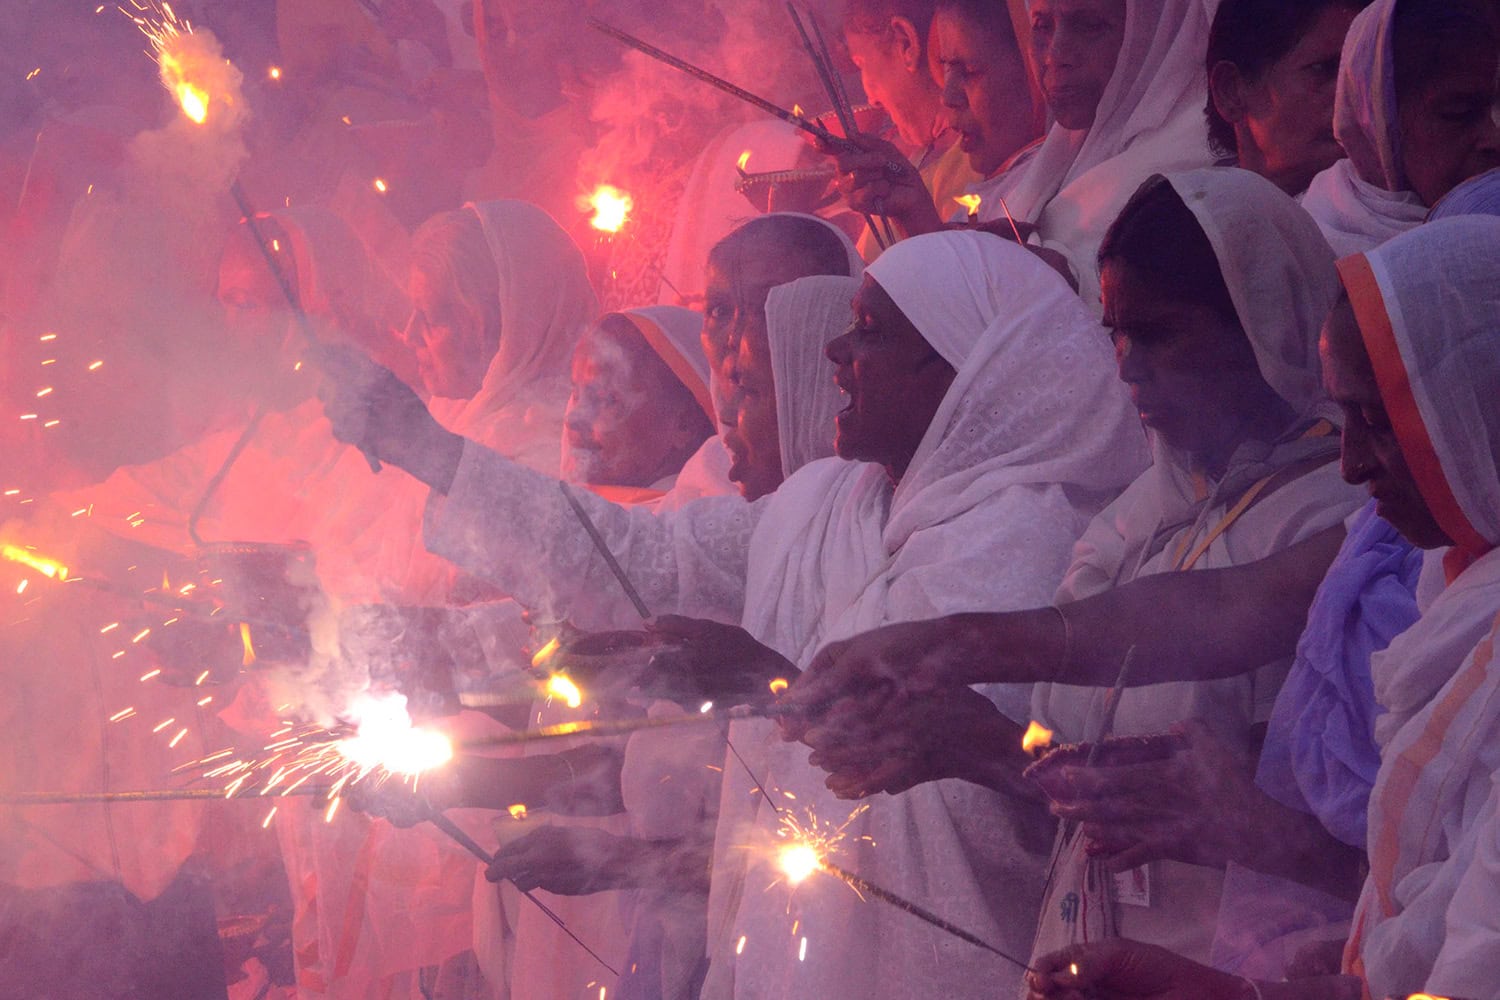 Widows, abandoned by their families, celebrate the Festival of Light in India